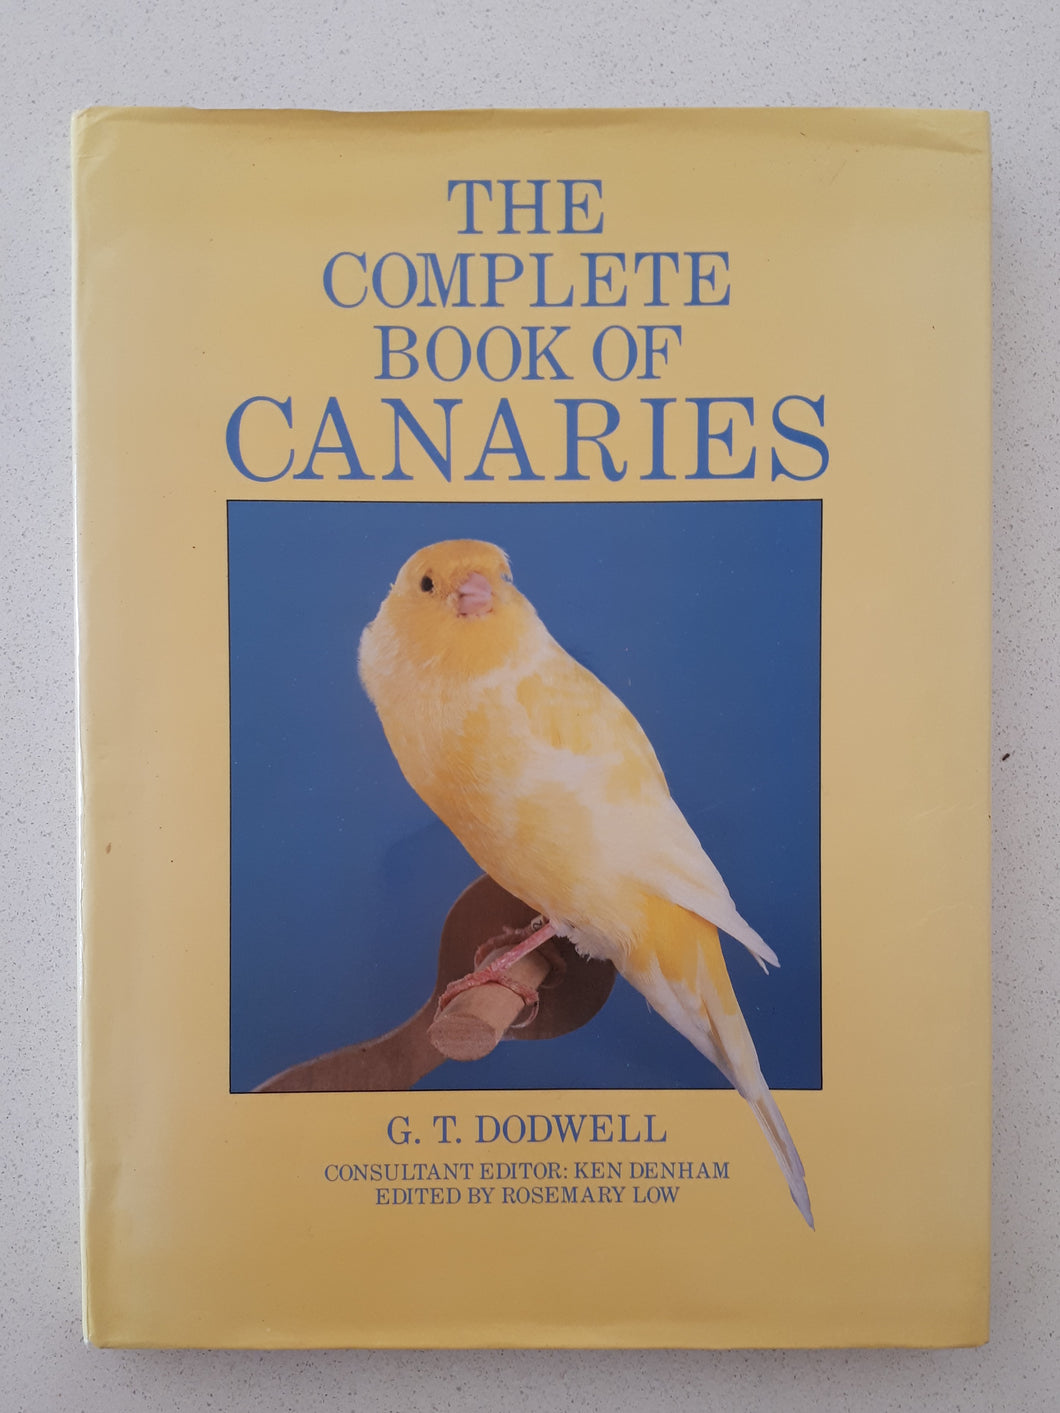 The Complete Book of Canaries by G. T. Dodwell